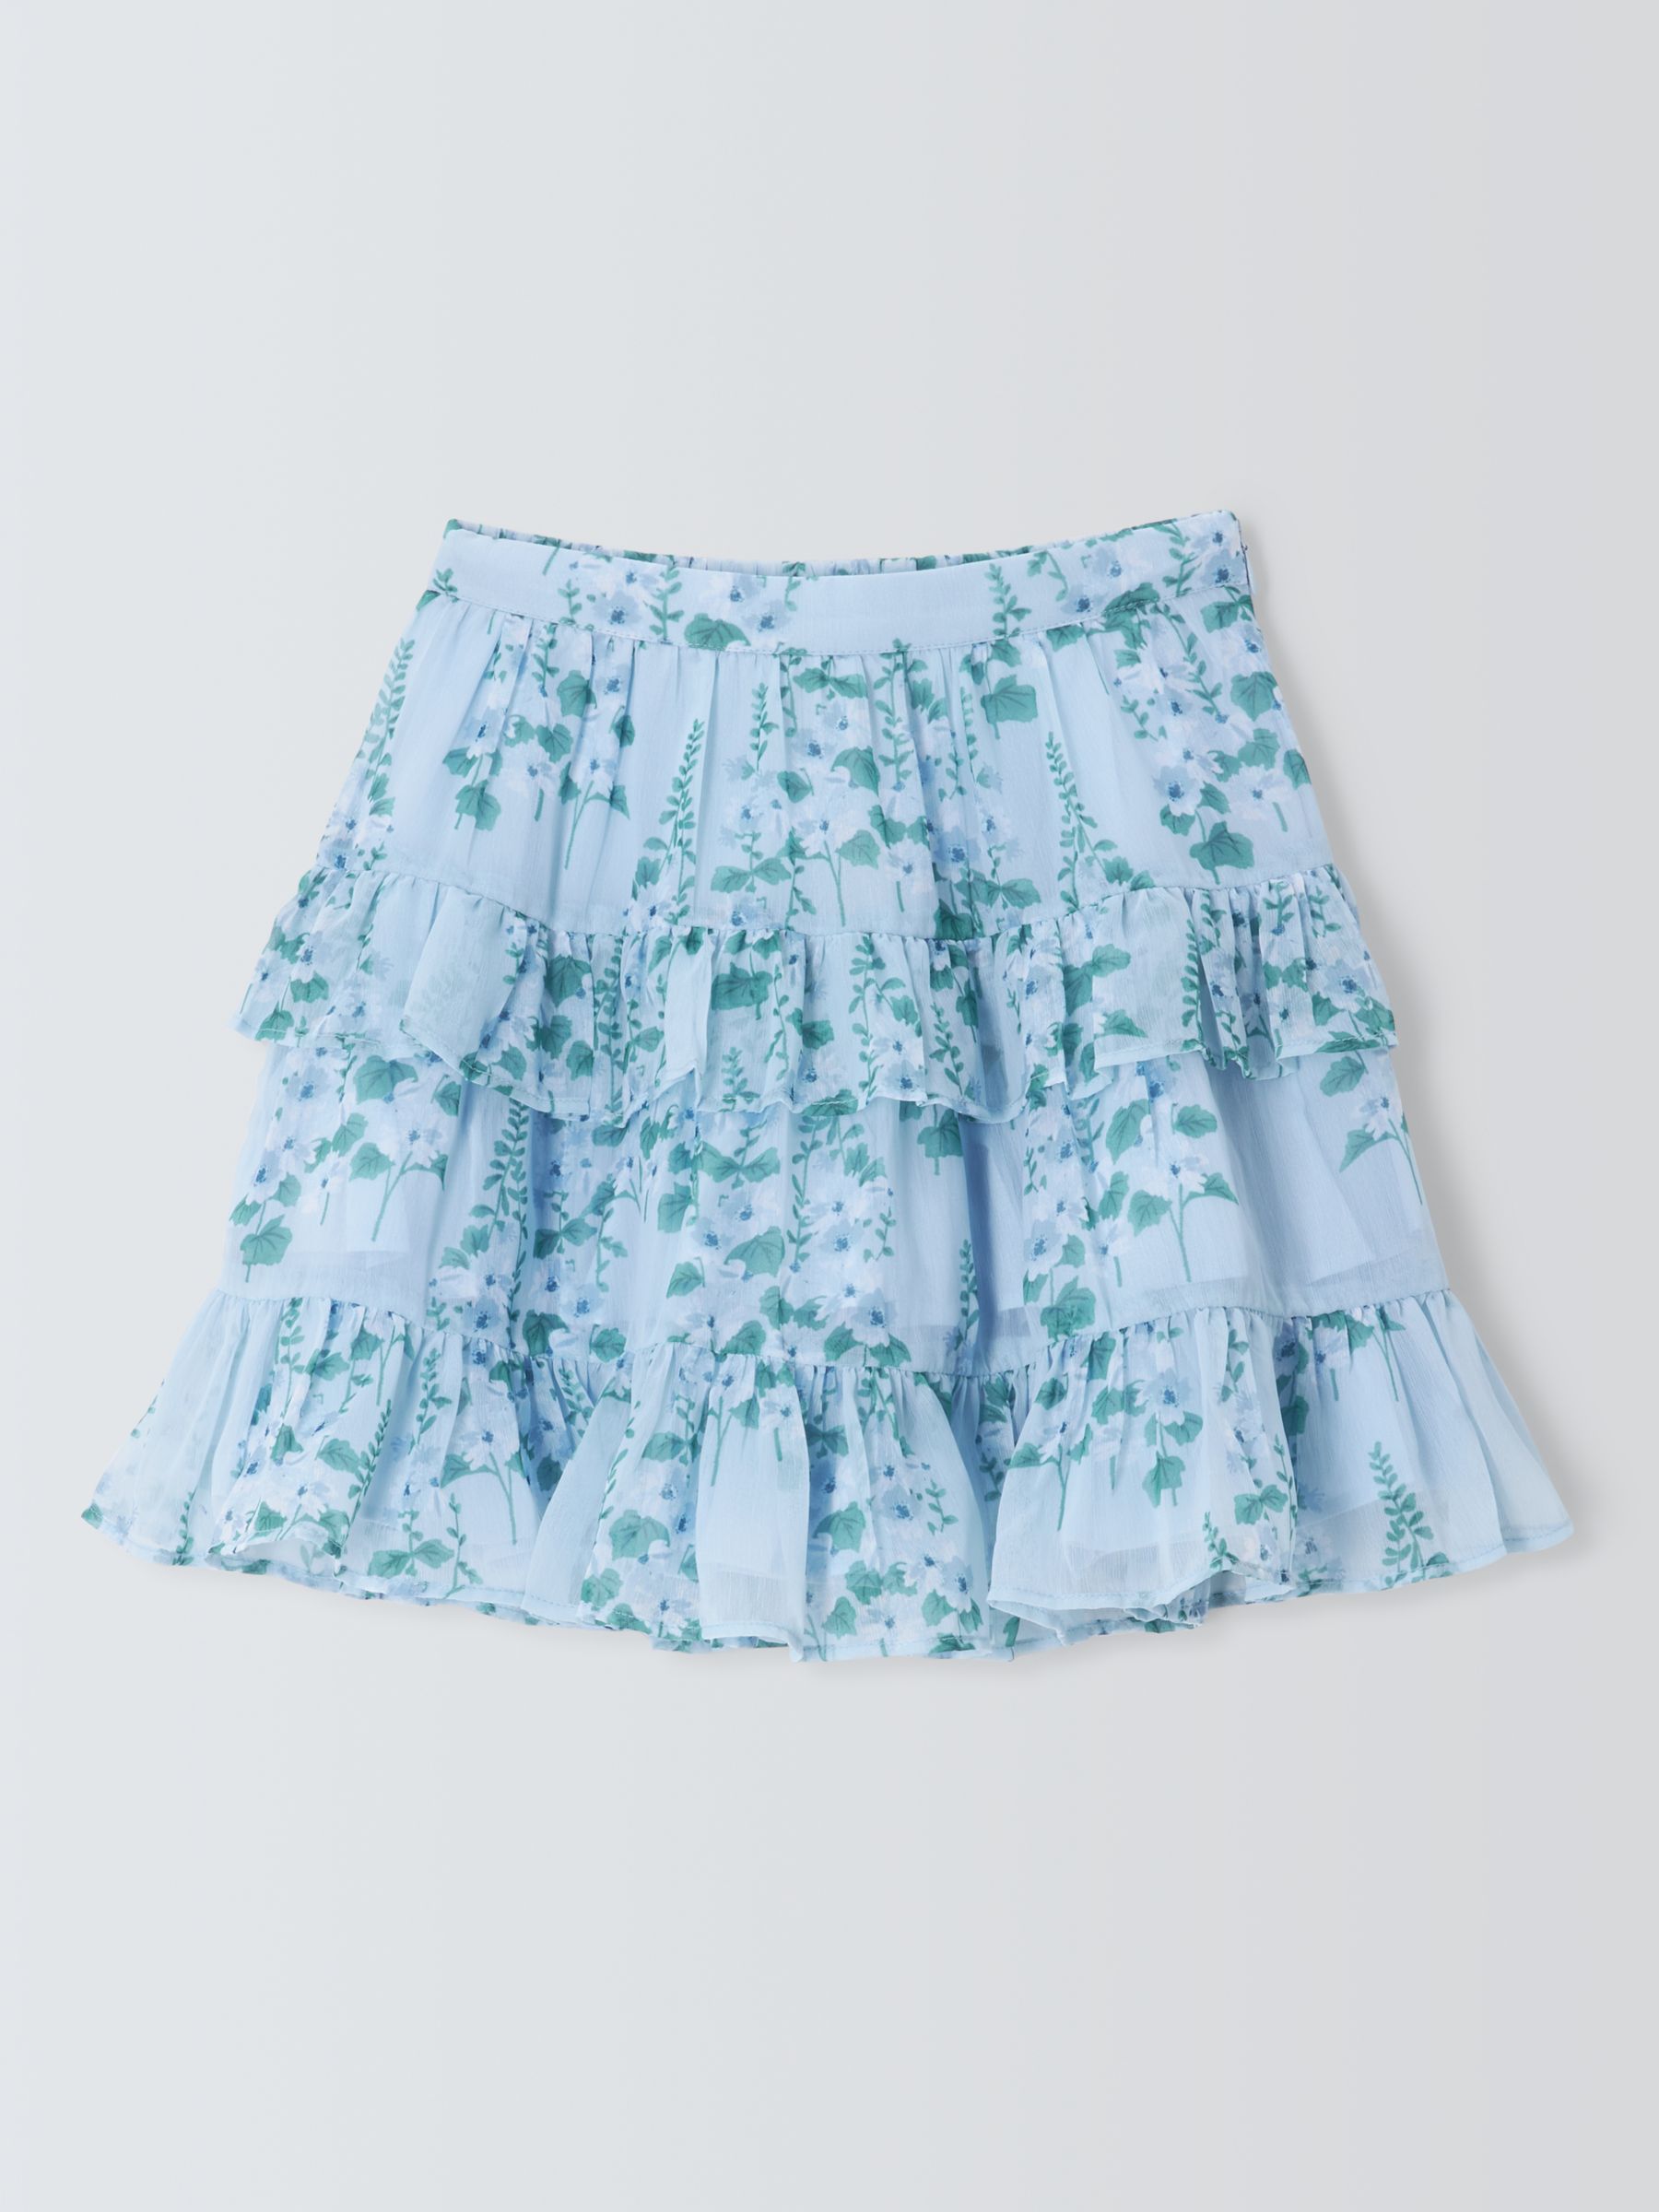 Buy John Lewis Heirloom Collection Kids' Floral Tiered Chiffon Skirt, Blue/White Online at johnlewis.com